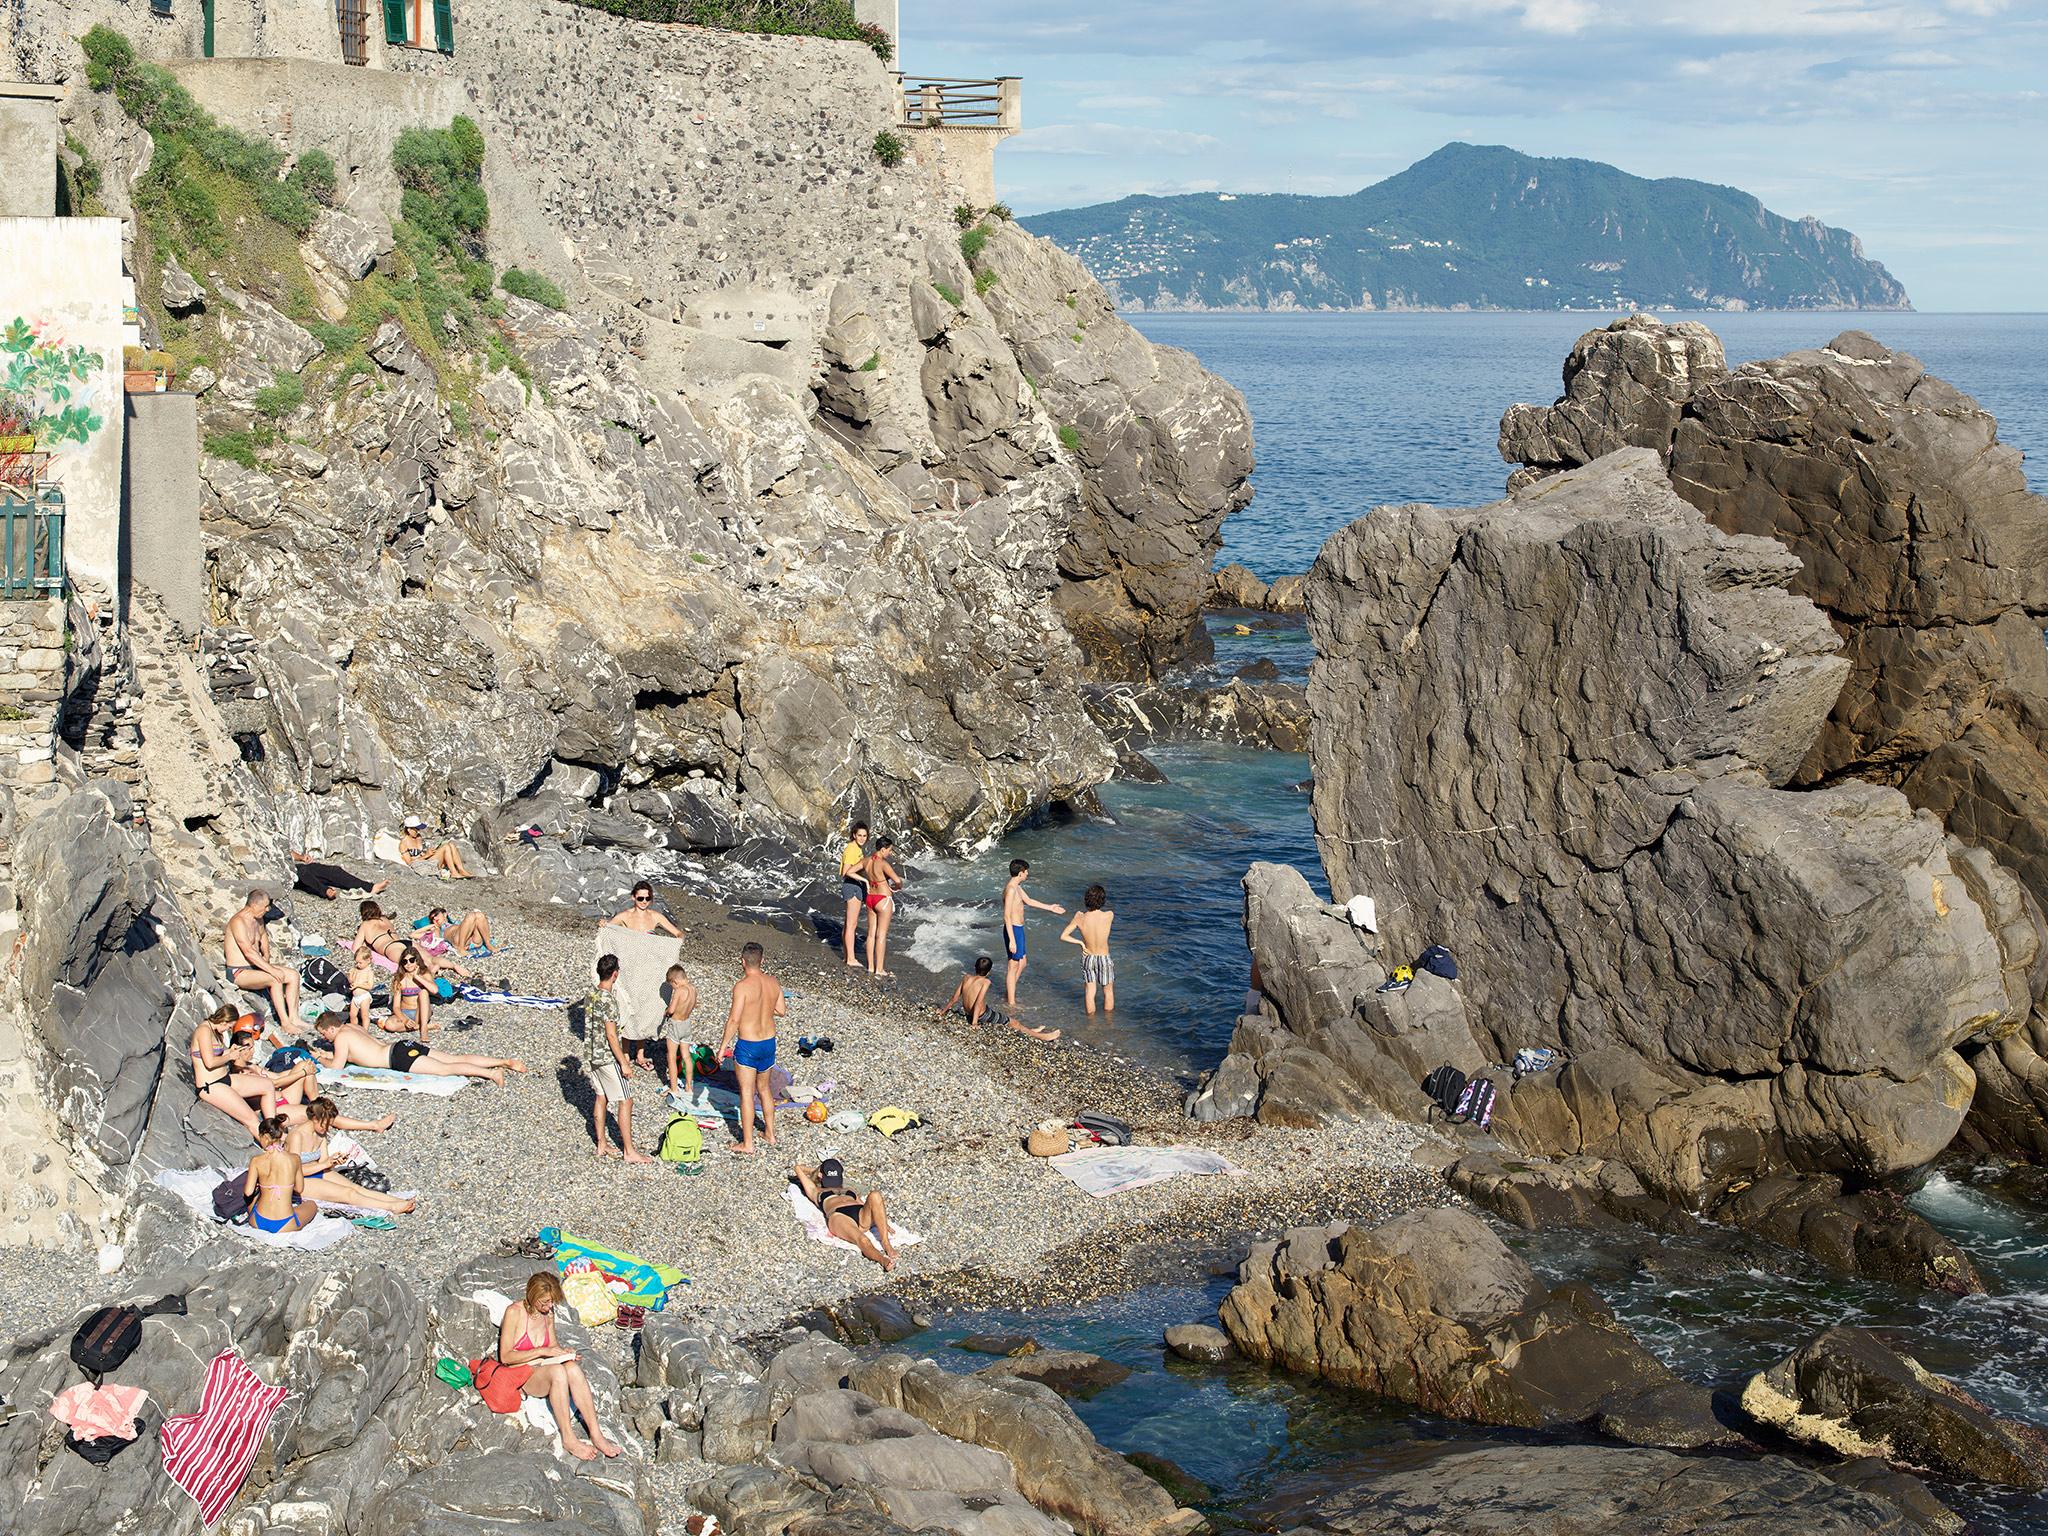 Photographic triptych composed of 'Nervi Sun', 'Nervi Cloud' and 'Nervi Dark', 2018 by Massimo Vitali a large-format photograph by Italian photographer Massimo Vitali. 
Chromogenic silver halide photography print mounted on D-bond and white wood